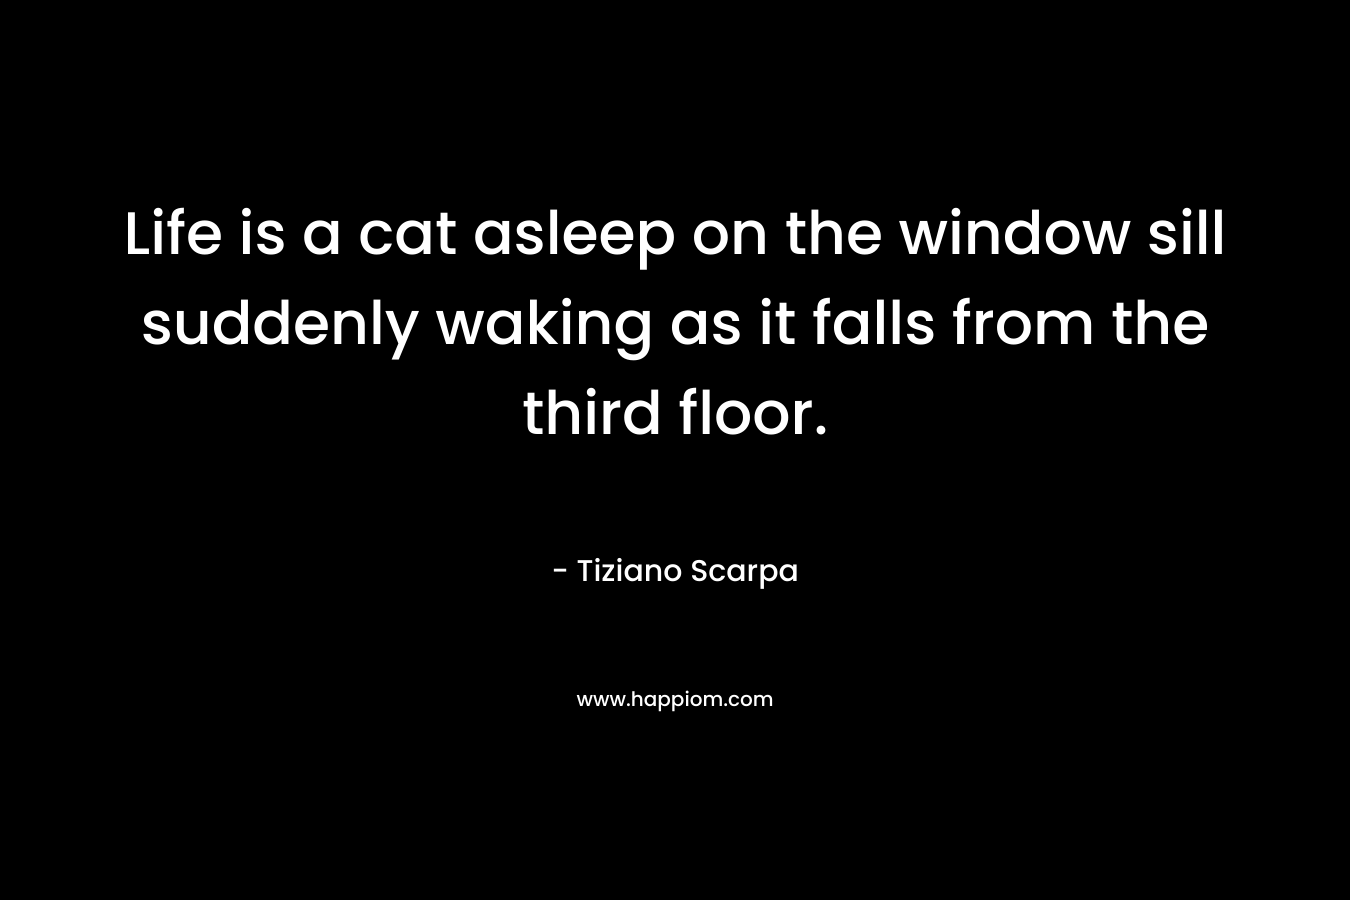 Life is a cat asleep on the window sill suddenly waking as it falls from the third floor. – Tiziano Scarpa